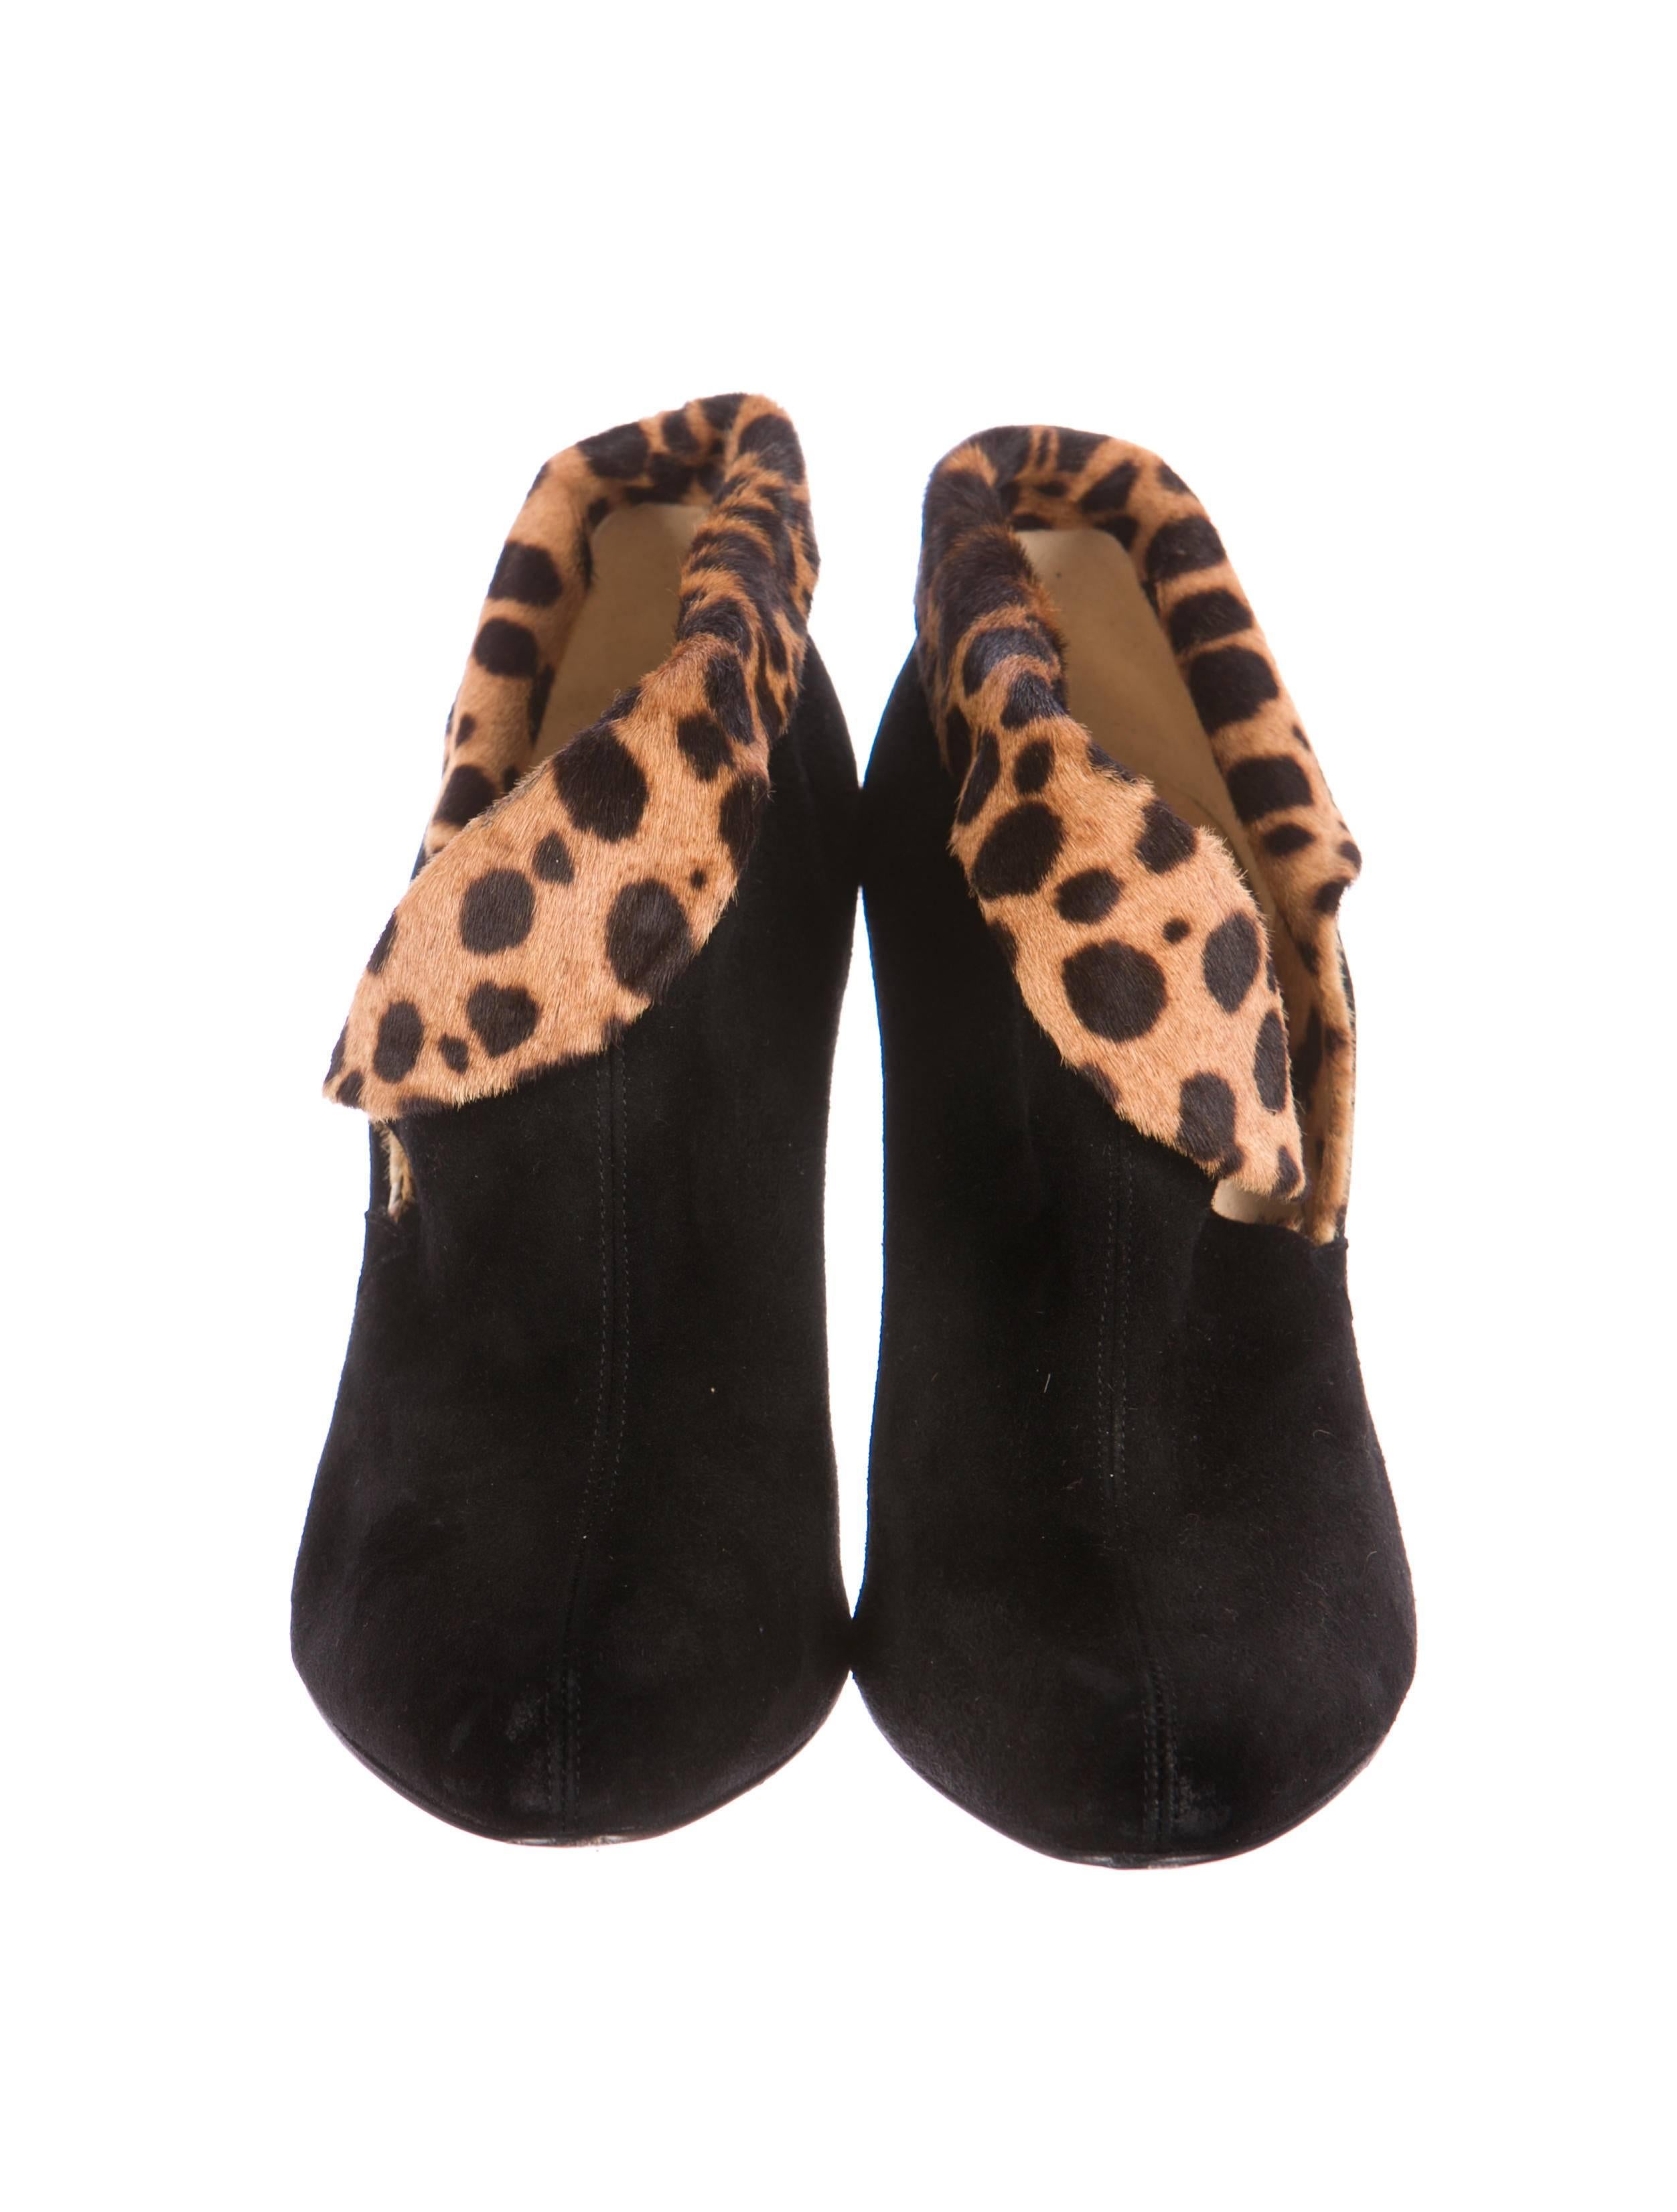 Black Christian Louboutin Leopard and Suede Ankle Booties For Sale